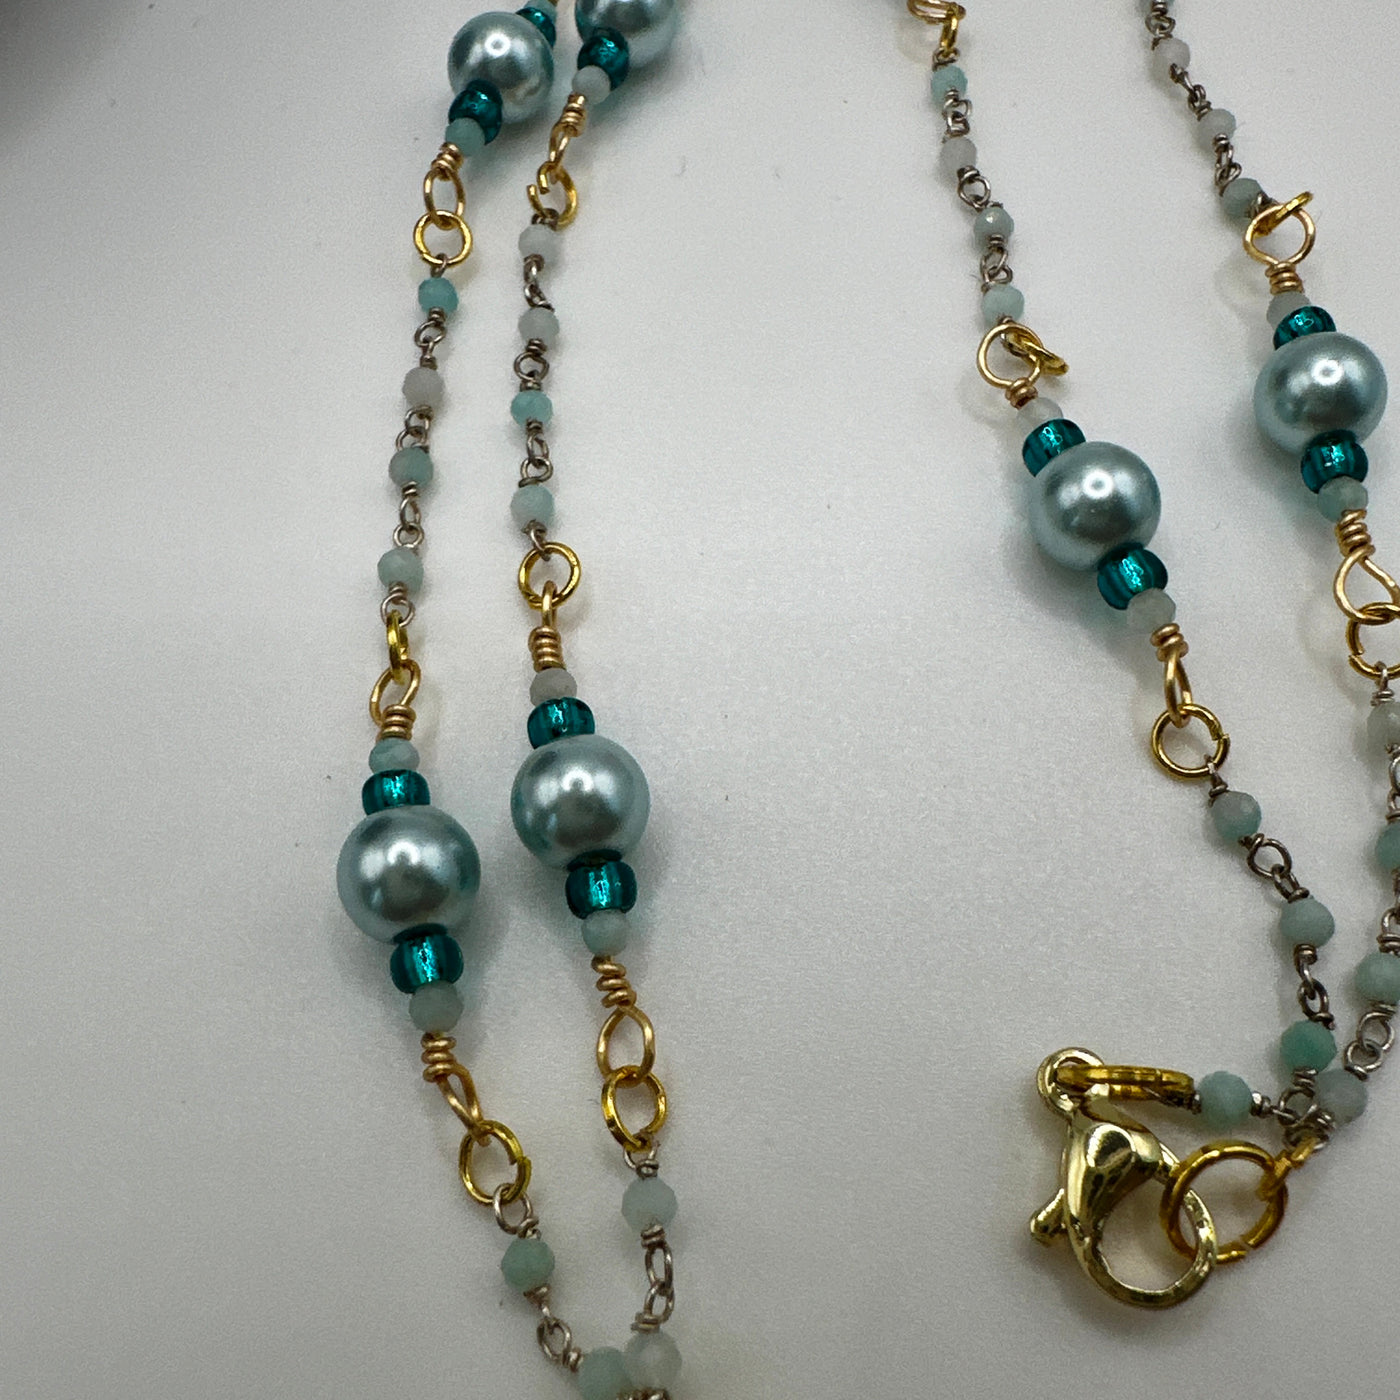 Short necklace silver 926 and light aqua beads with light blue pearls